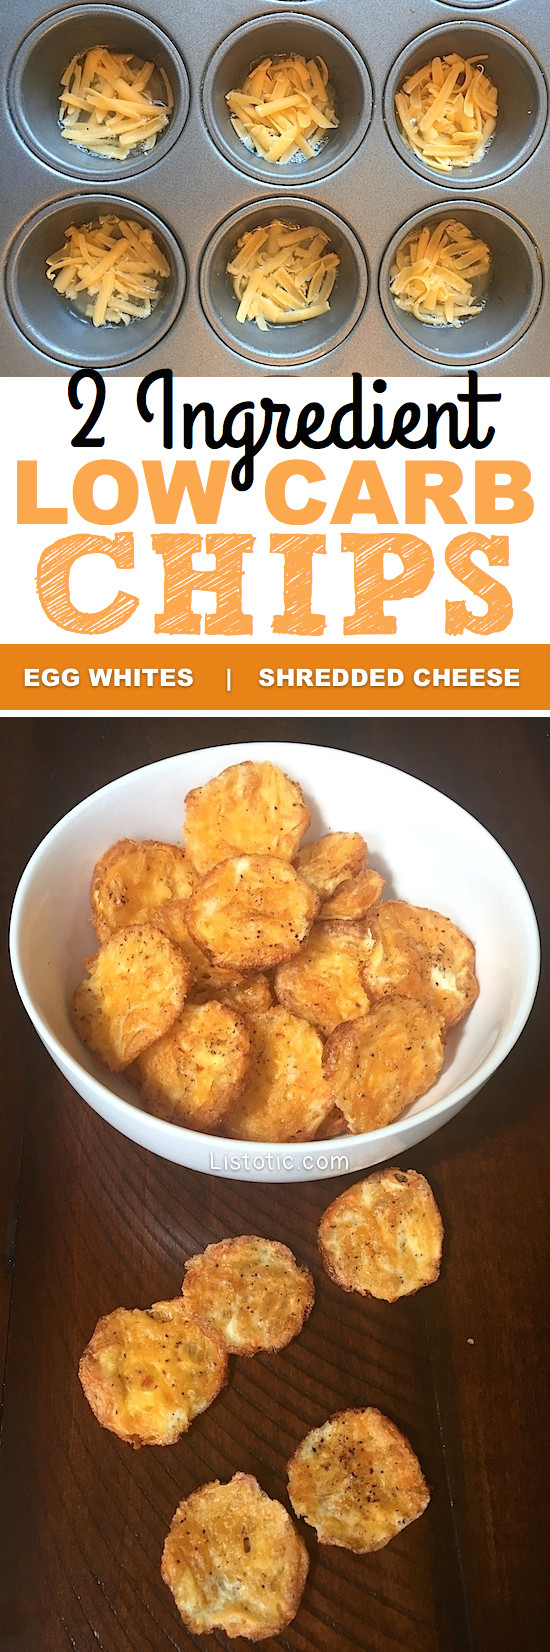 Low Carb Chips And Crackers
 37 Weight Loss Snacks Under 200 Calories That Will Keep